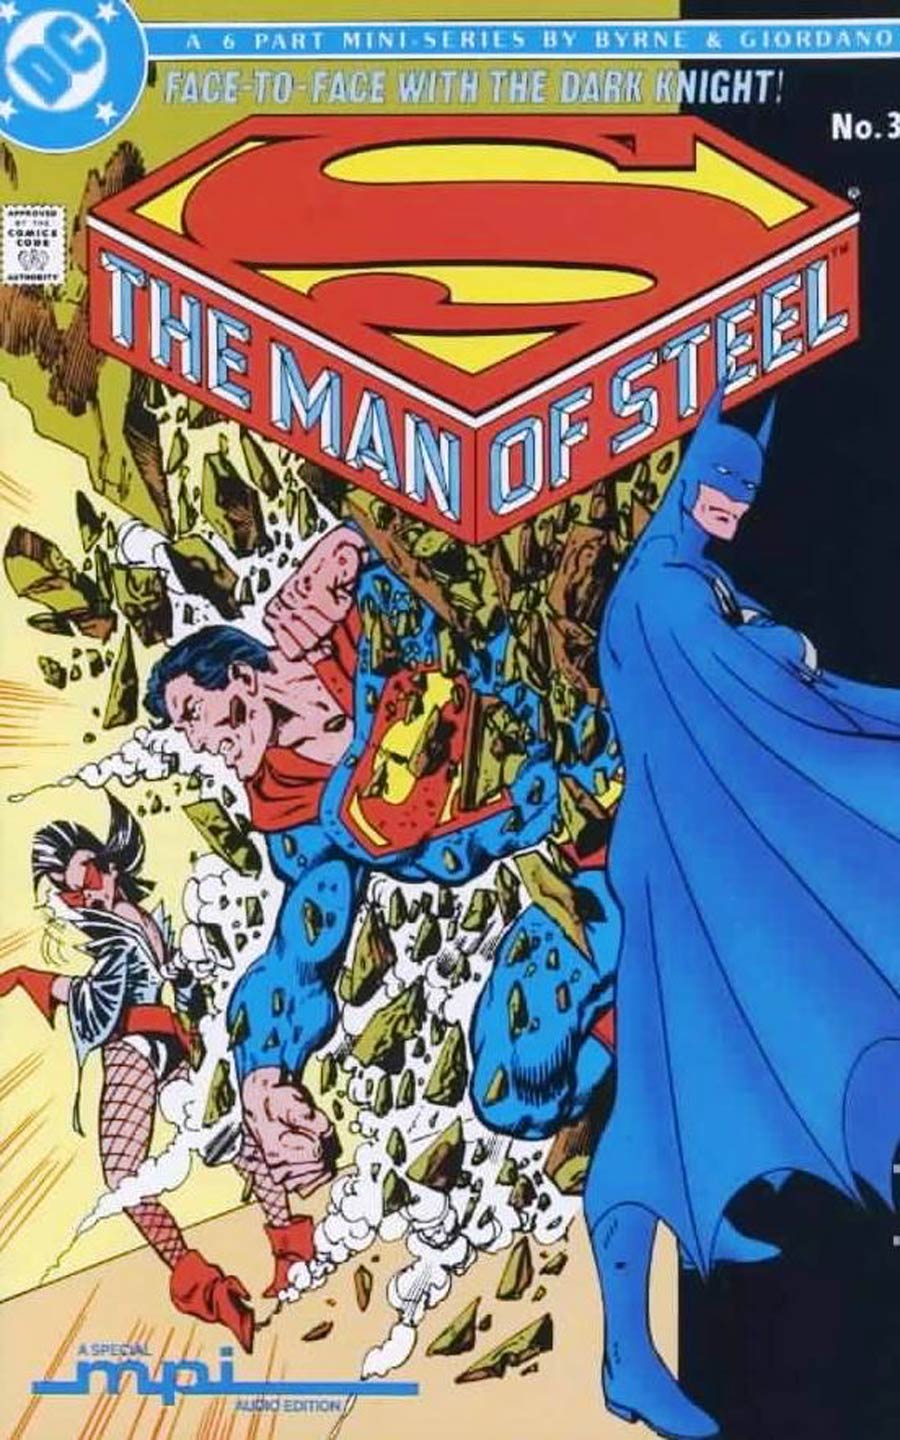 Man Of Steel #3 Cover B MPI Audio Edition With Cassette Tape